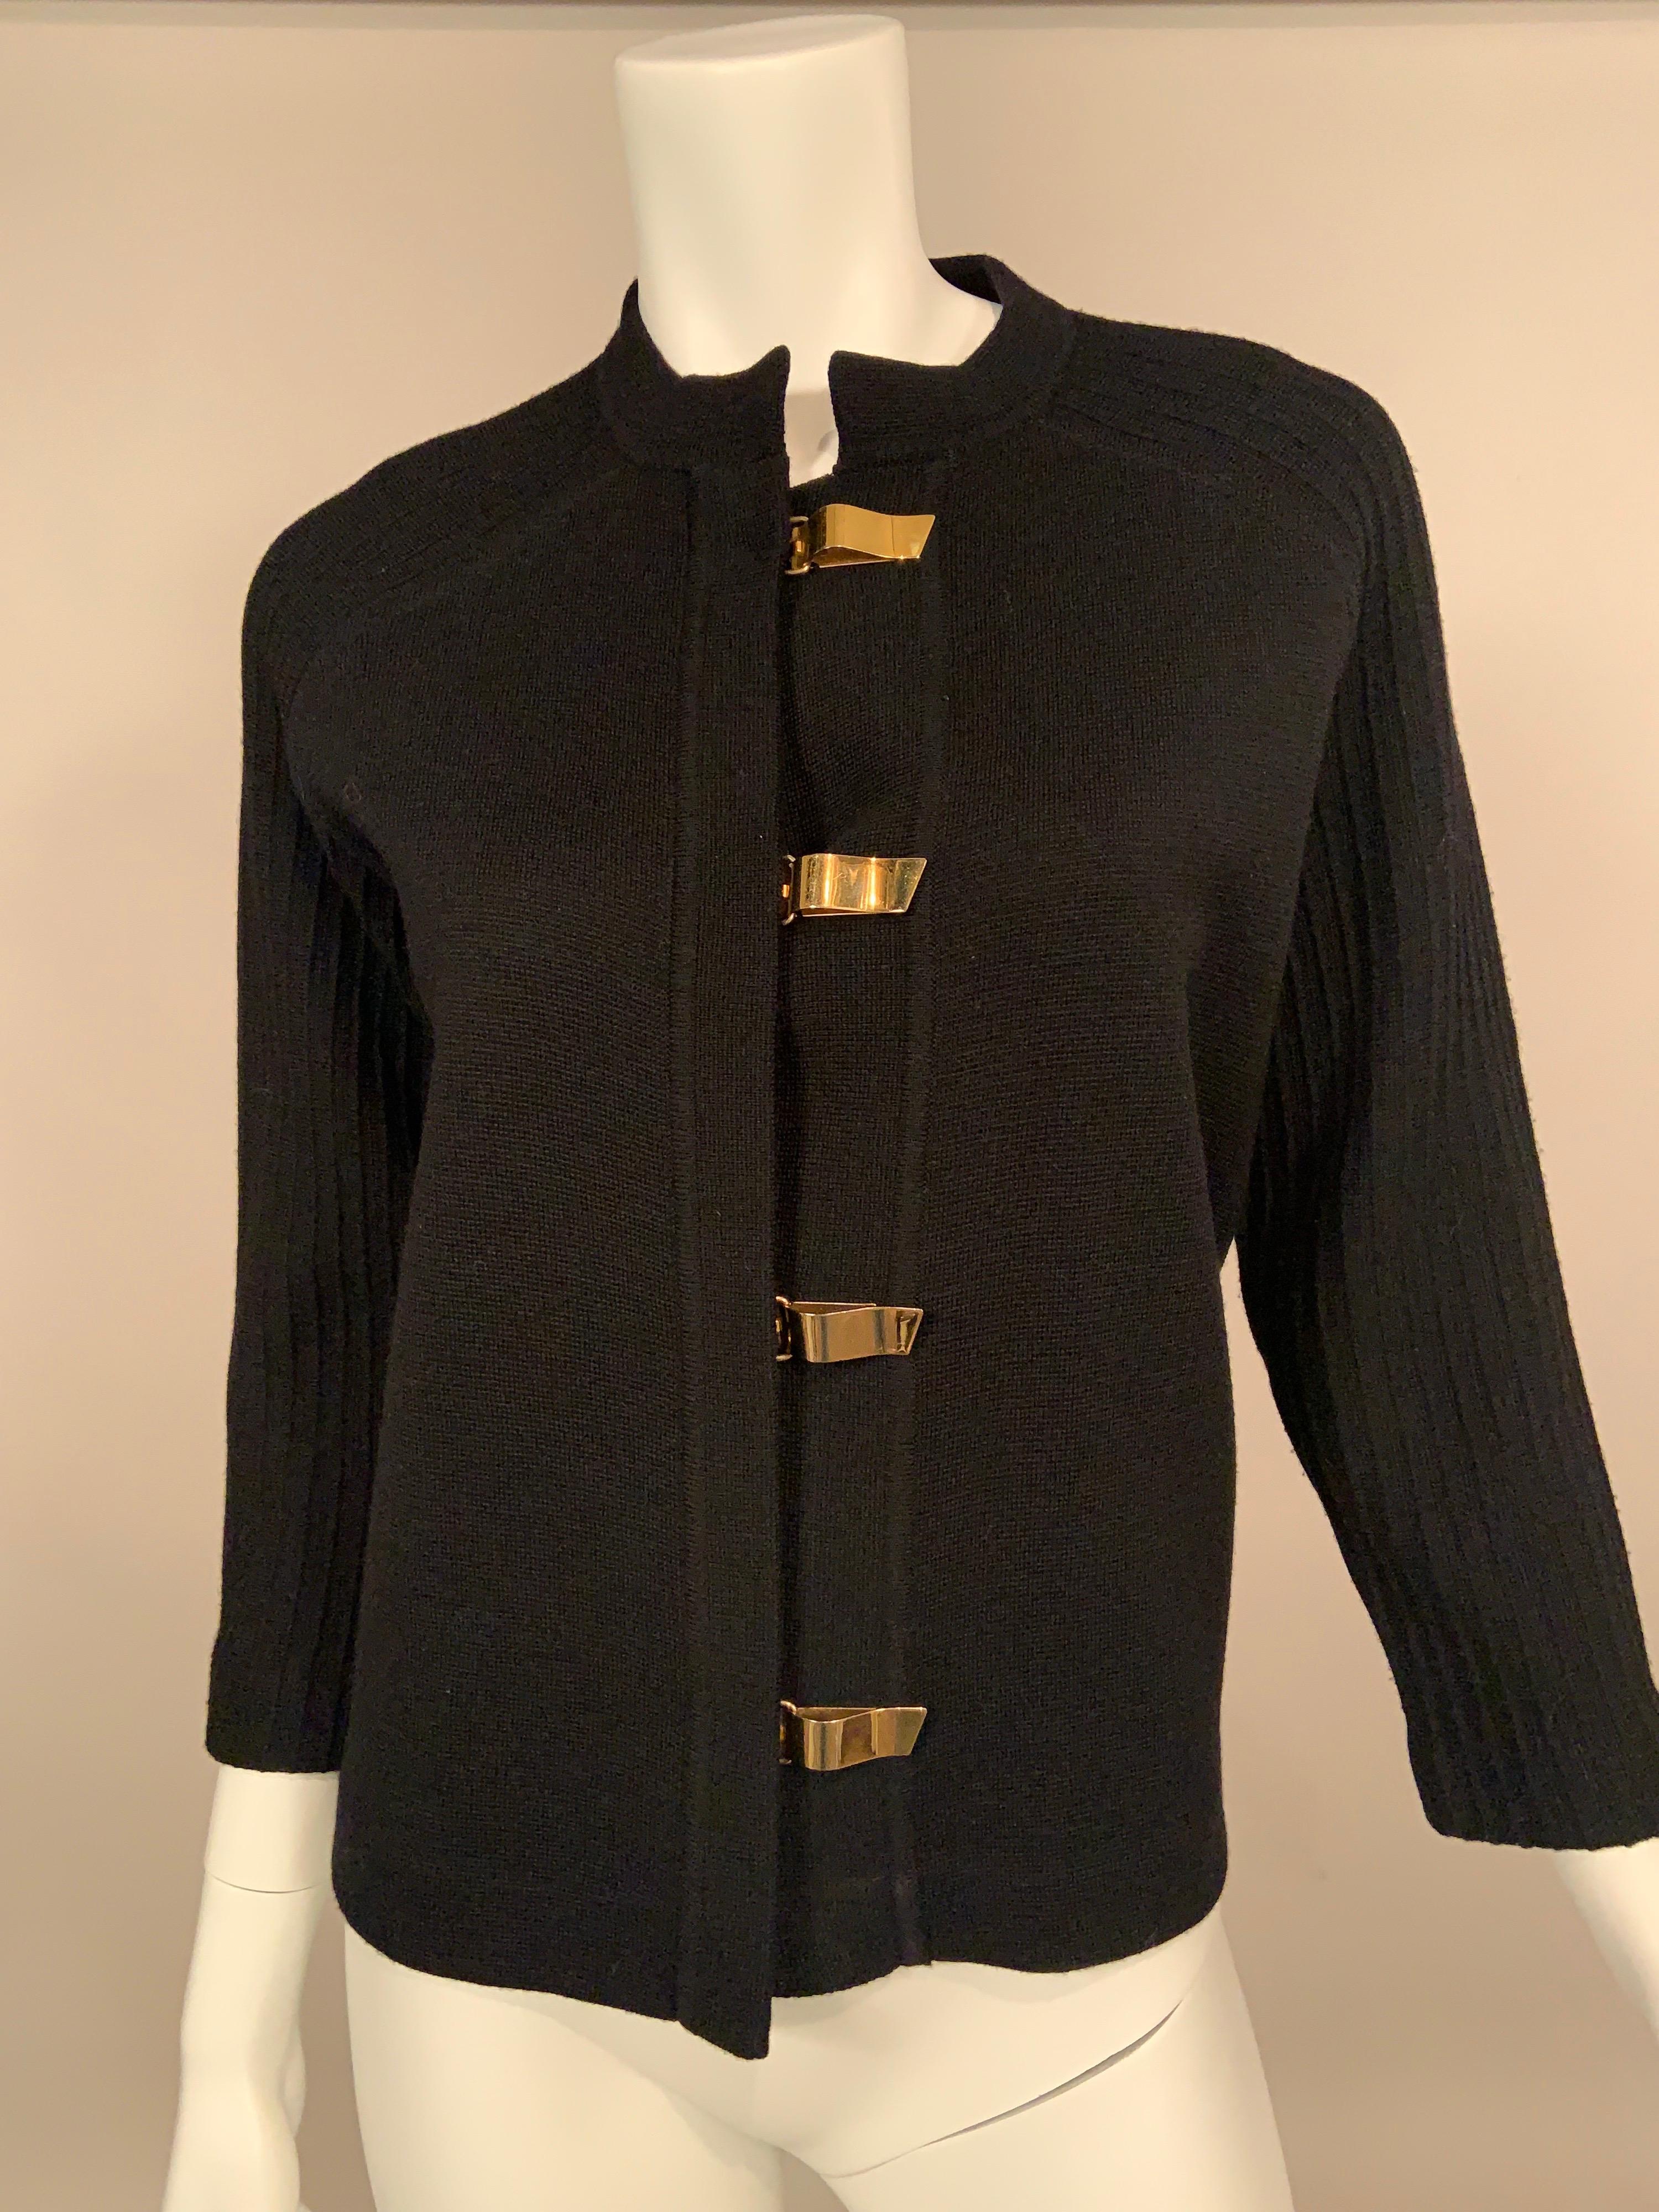 This black wool cardigan sweater has so many interesting details!   The sweater has a collar and front placket with very interesting gold toned toggles for closures, reminiscent of Bonnie Cashin designs.  The body of the sweater is a flat knit and